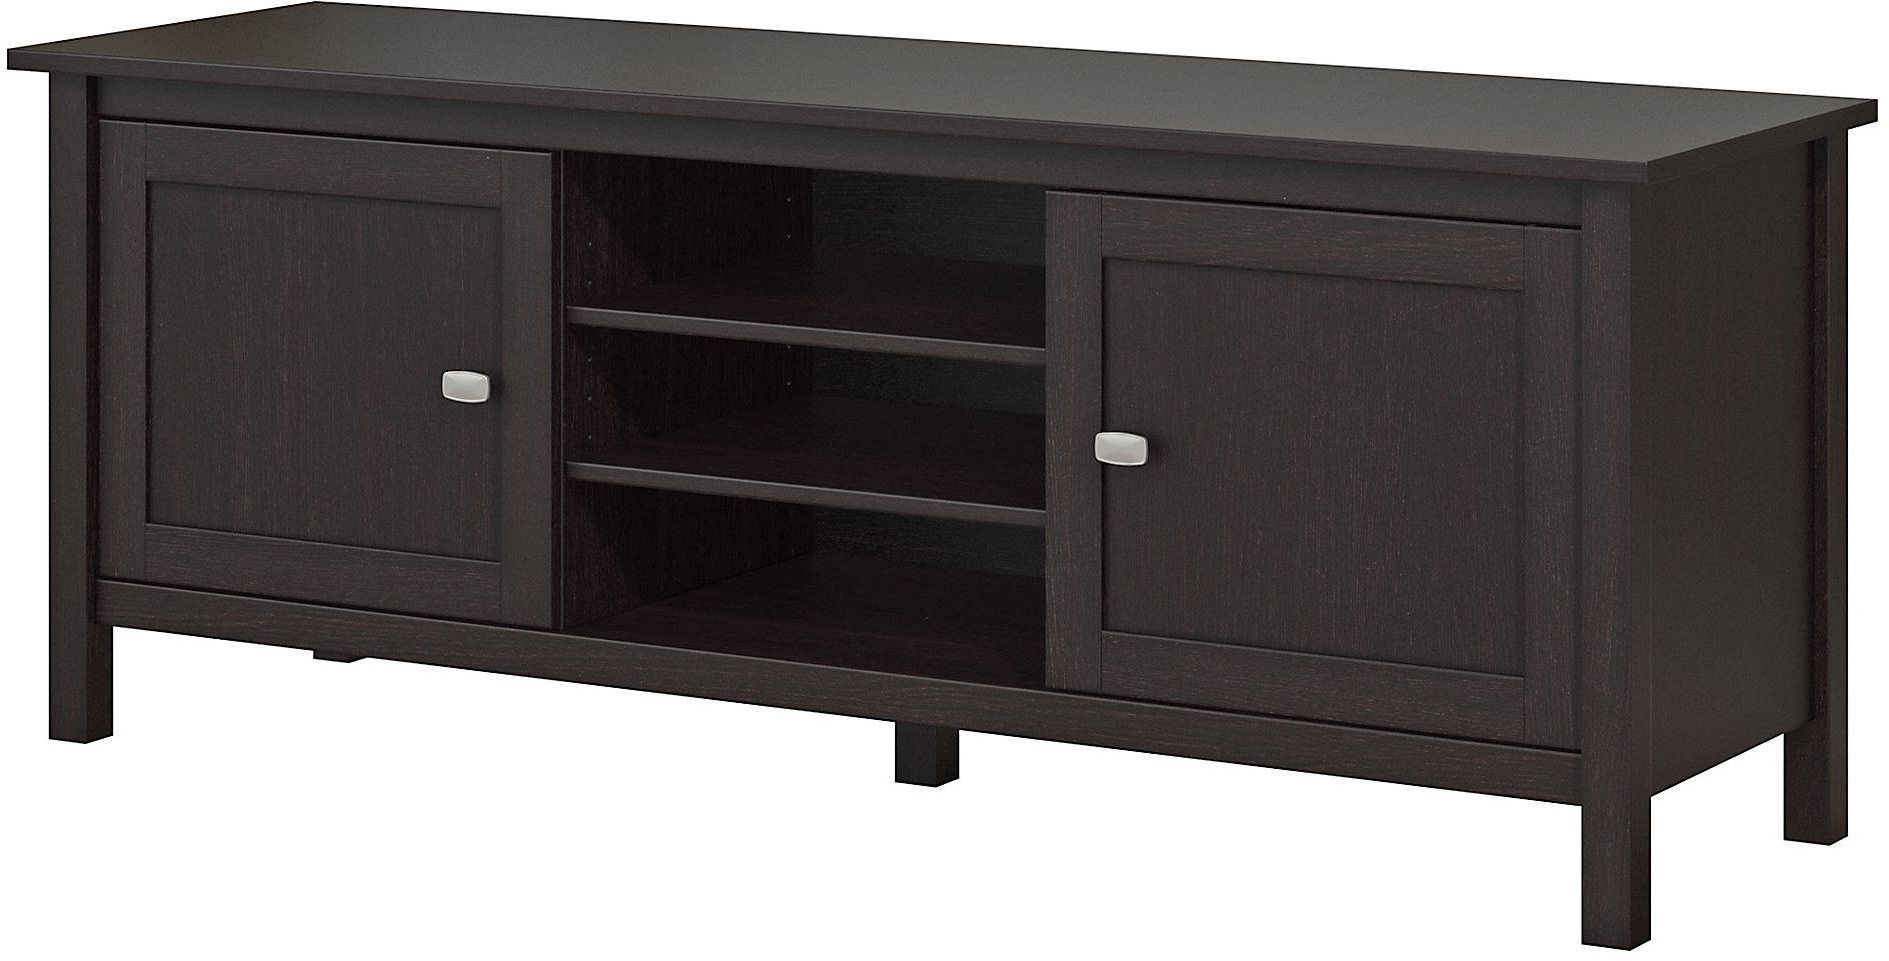 2017 Neilsen Tv Stands For Tvs Up To 65" With Regard To Broadview Espresso Oak 65" Tv Stand From Bush (Photo 17 of 25)